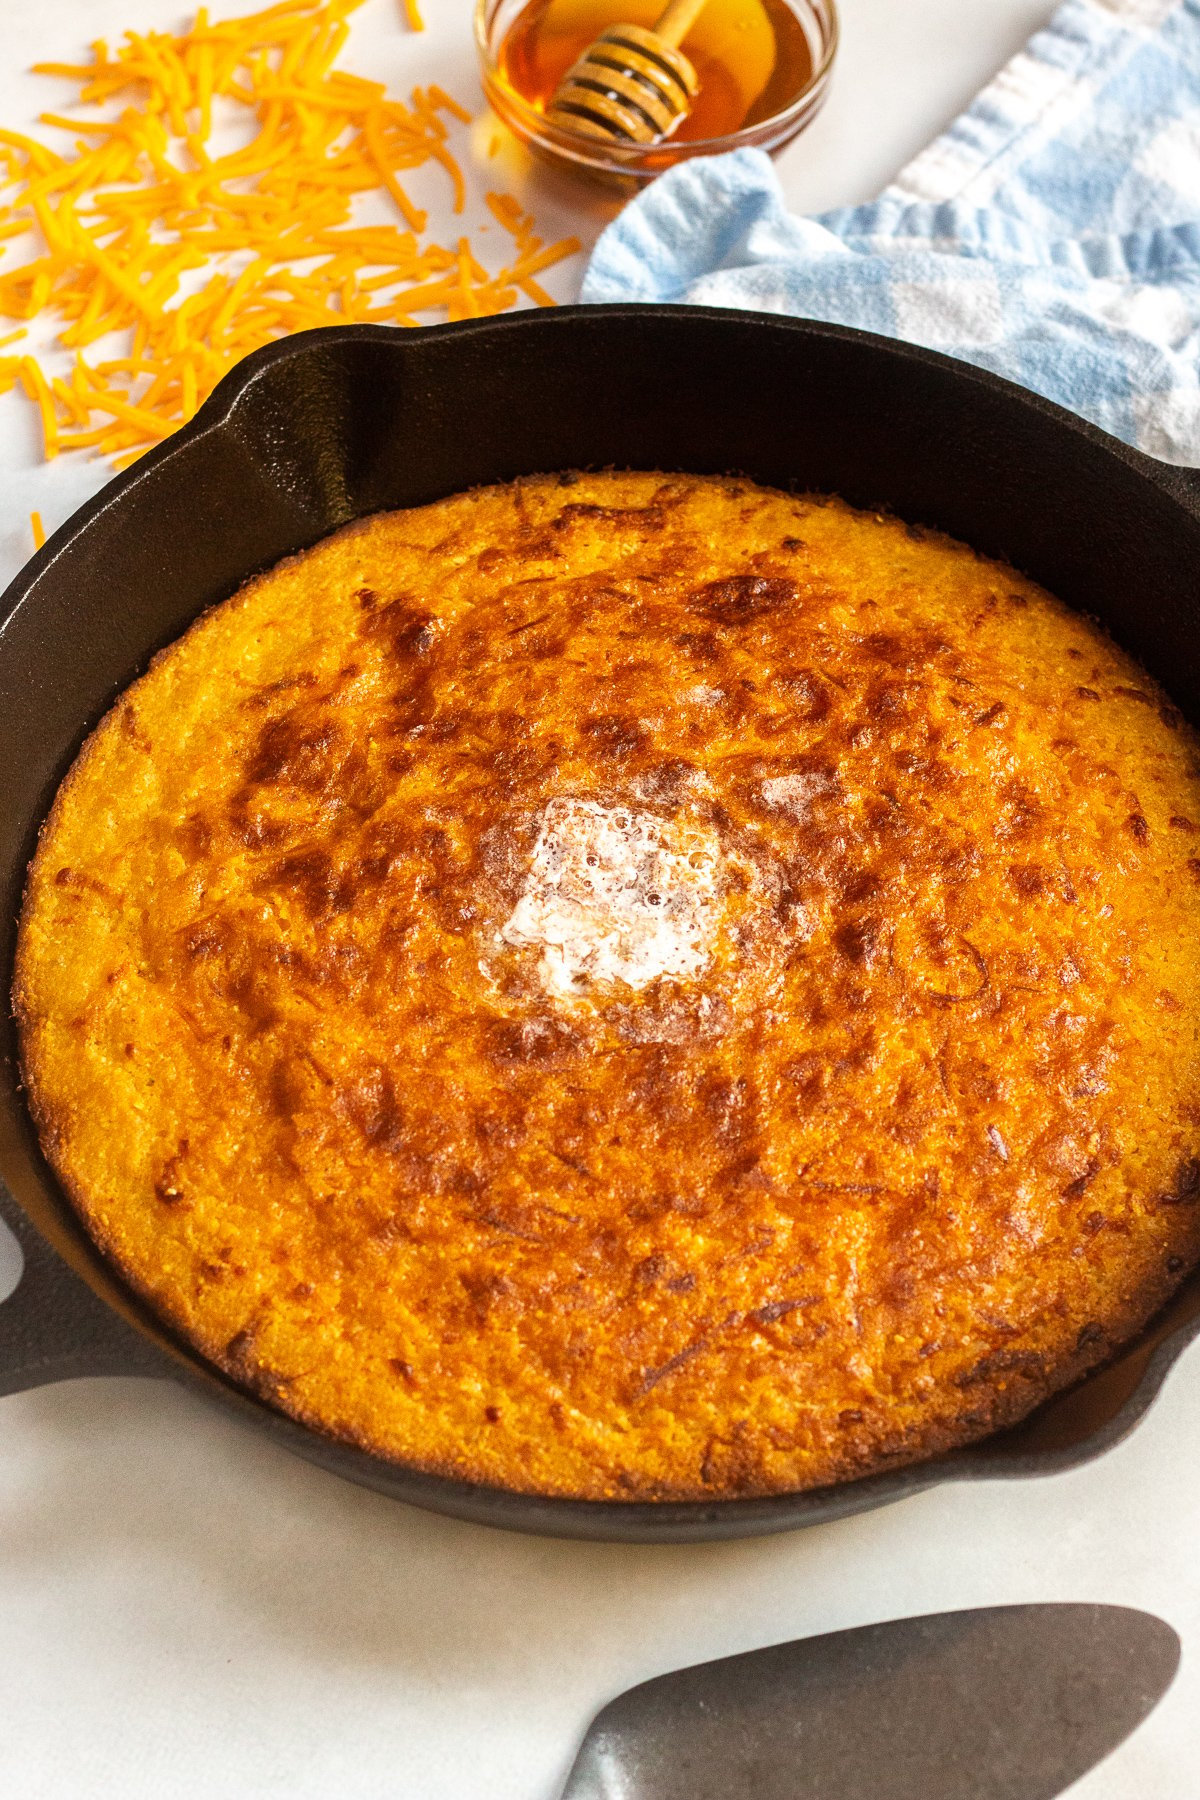 Cast iron skillet with baked corn bread and a pat of butter on top.